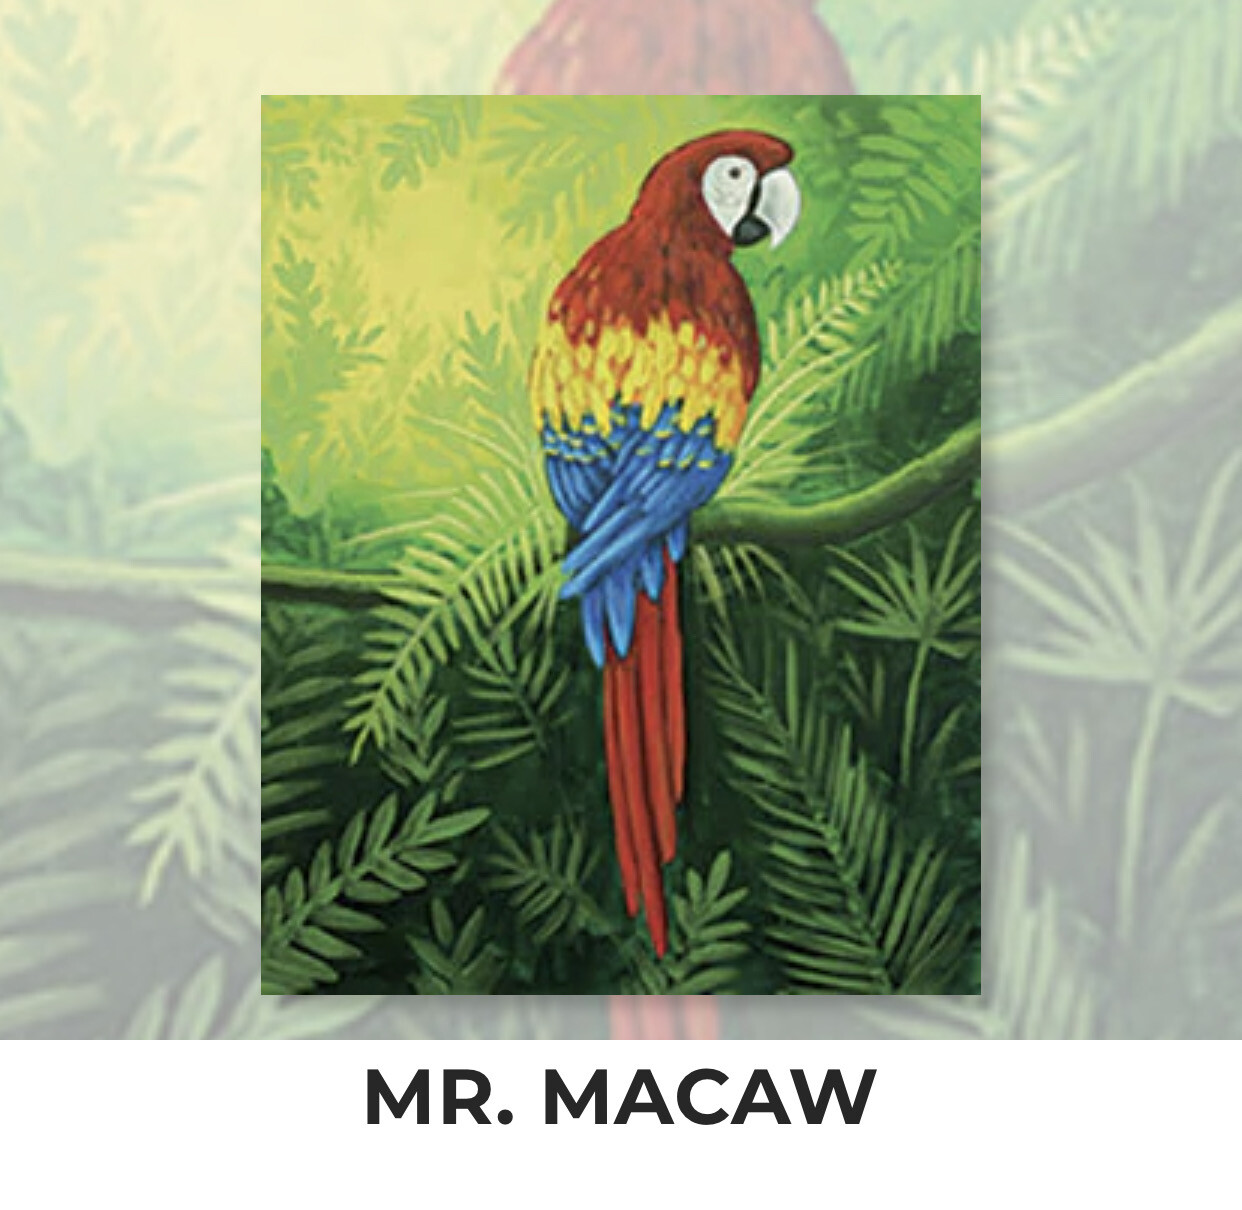 Mr. Macaw ADULT Acrylic Paint On Canvas DIY Art Kit - 3 Week Special Order